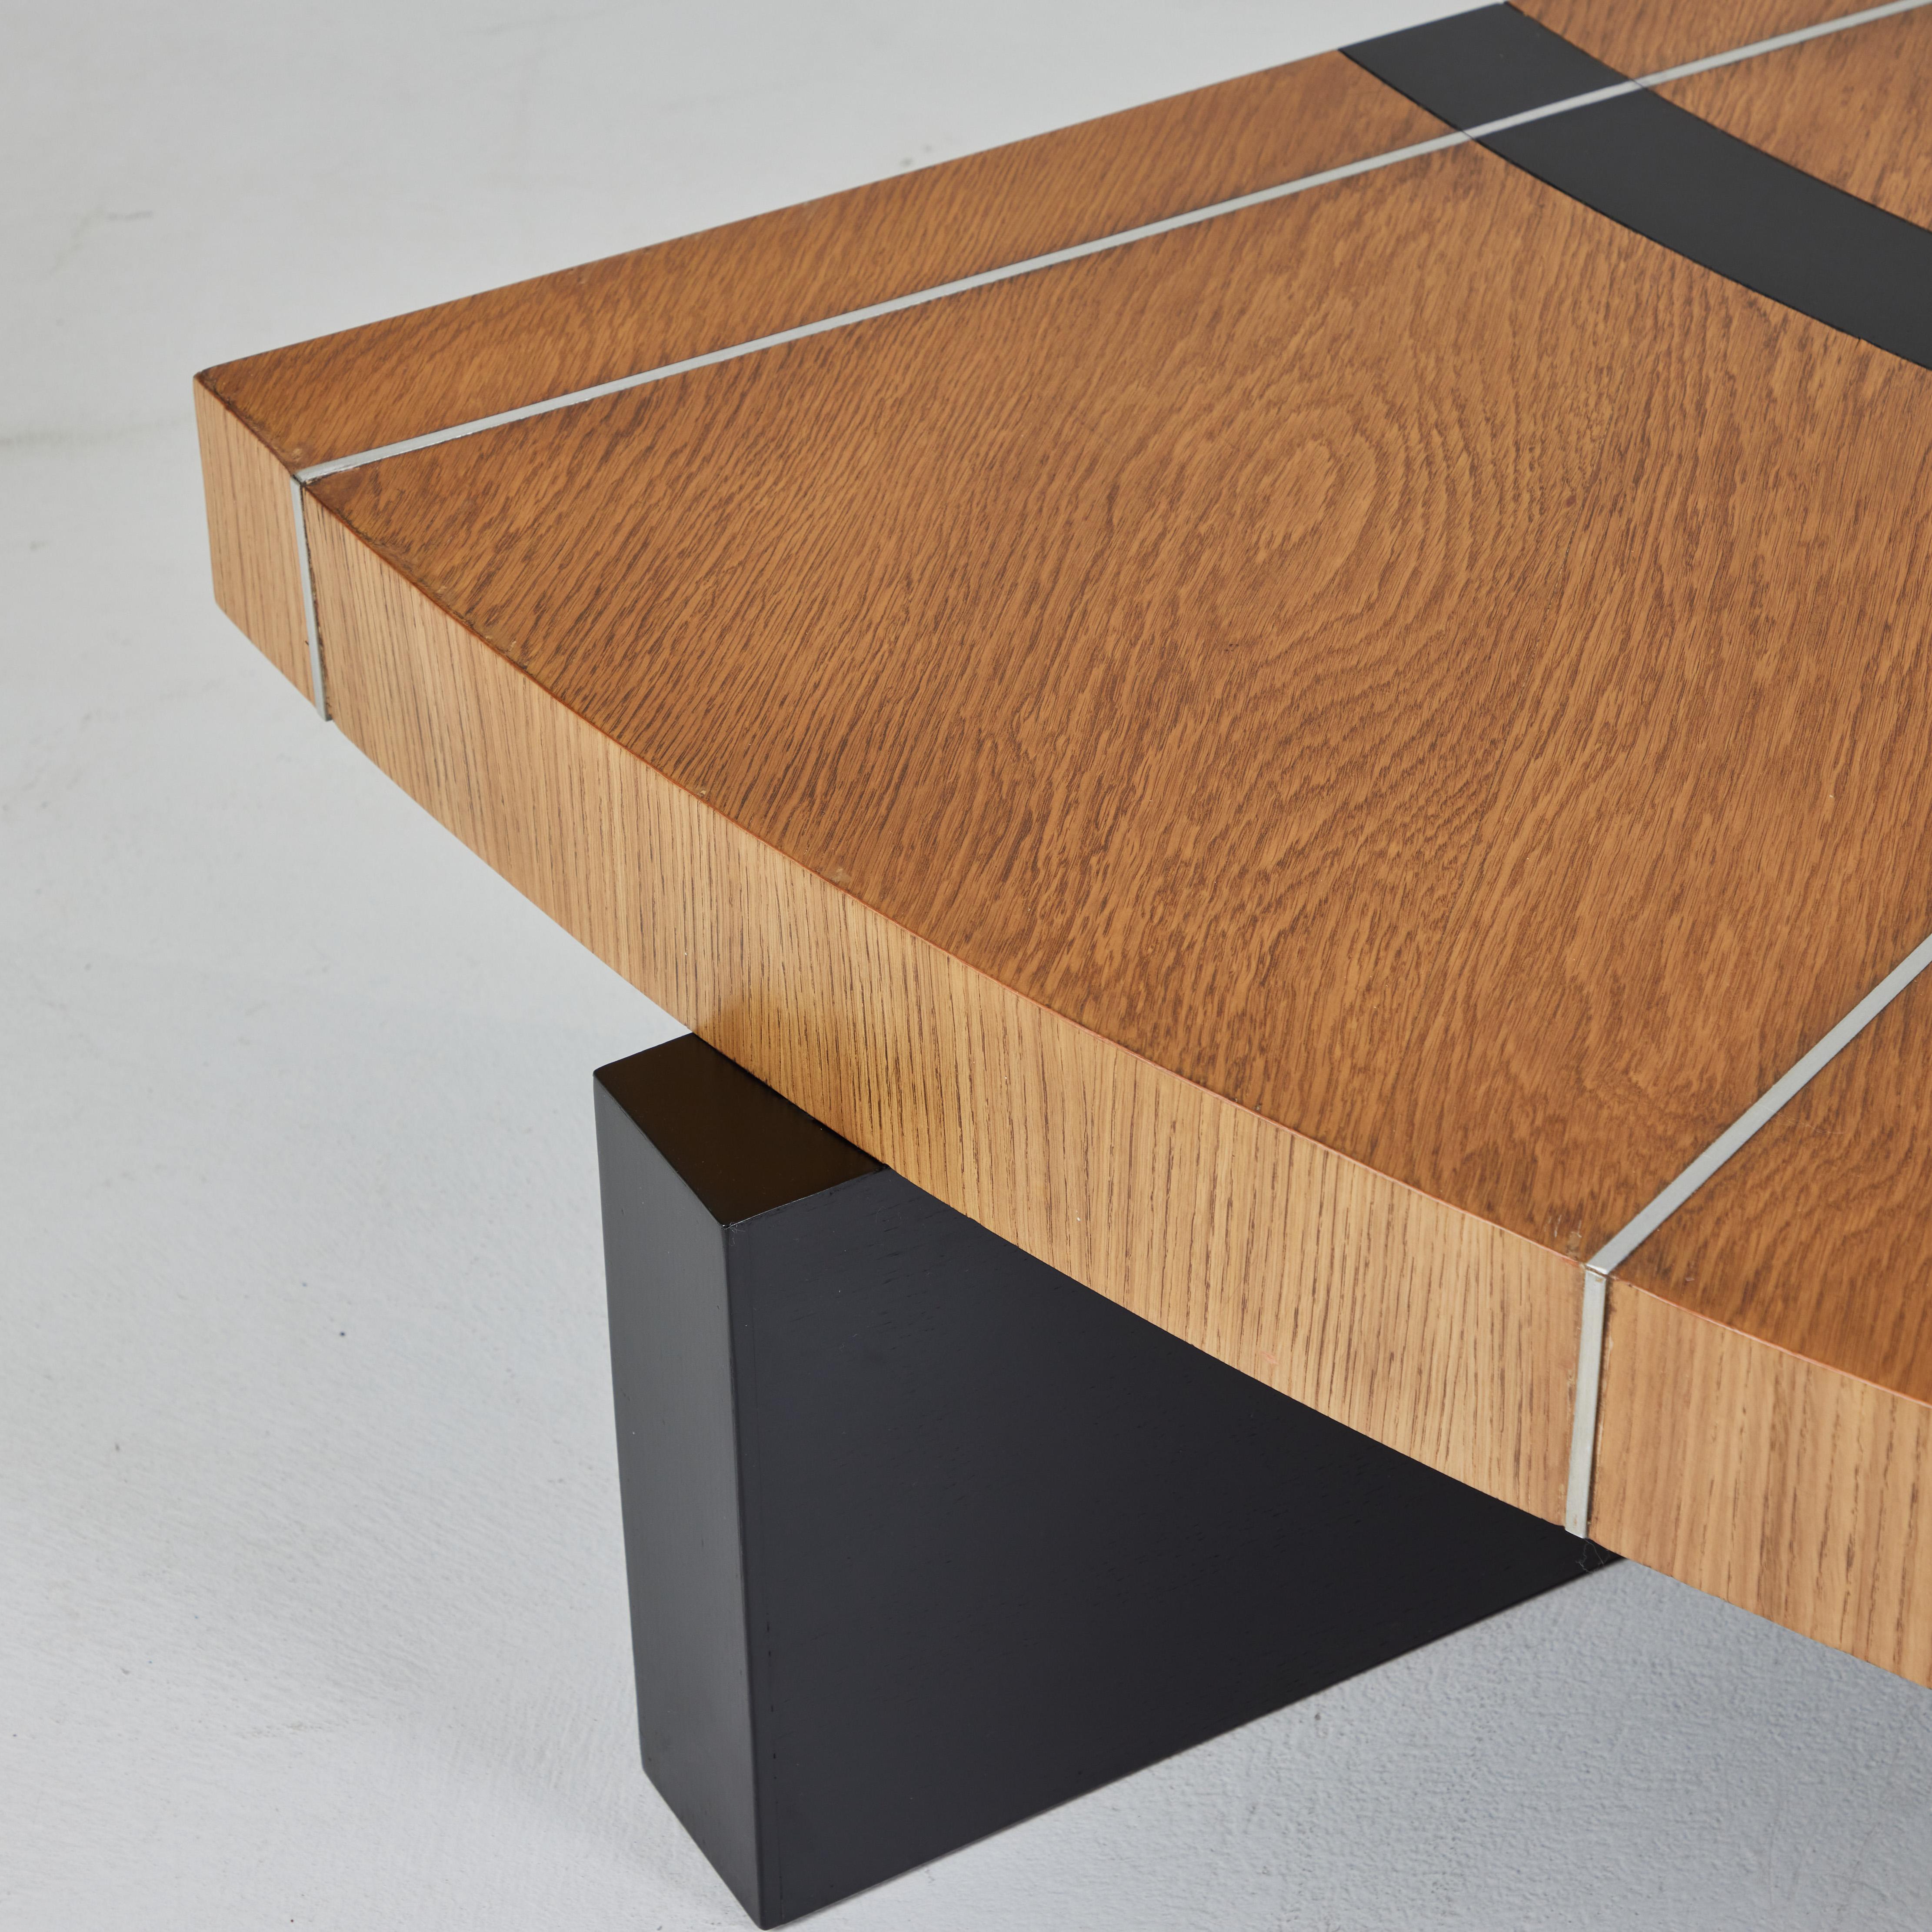 Mid-20th Century Modernist Inlaid Cocktail Table, Designed by William Haines